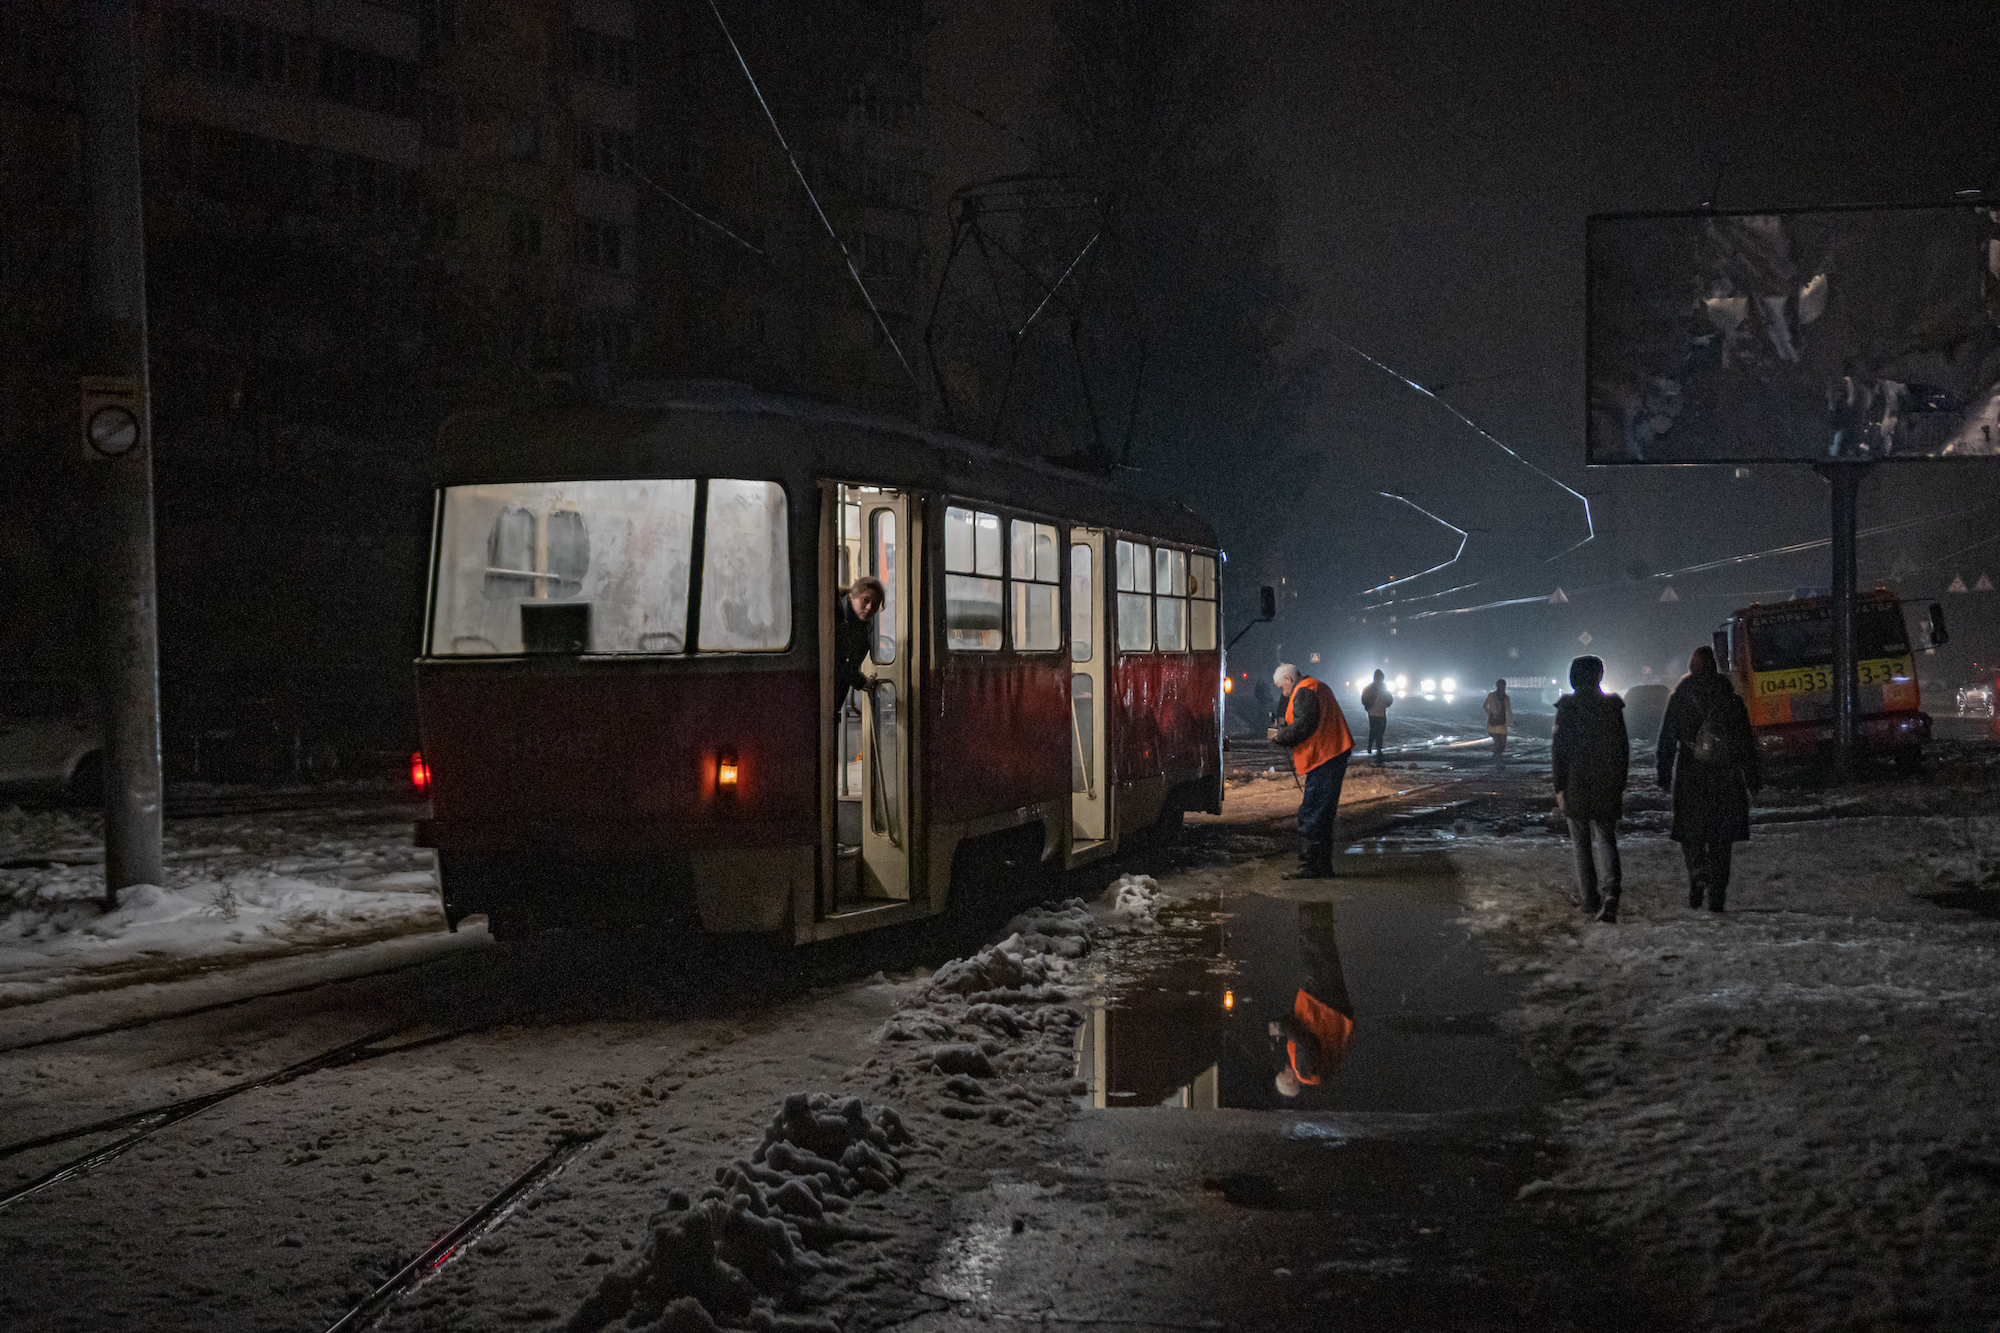 A tram is seen during a blackout in Kyiv on Thursday.